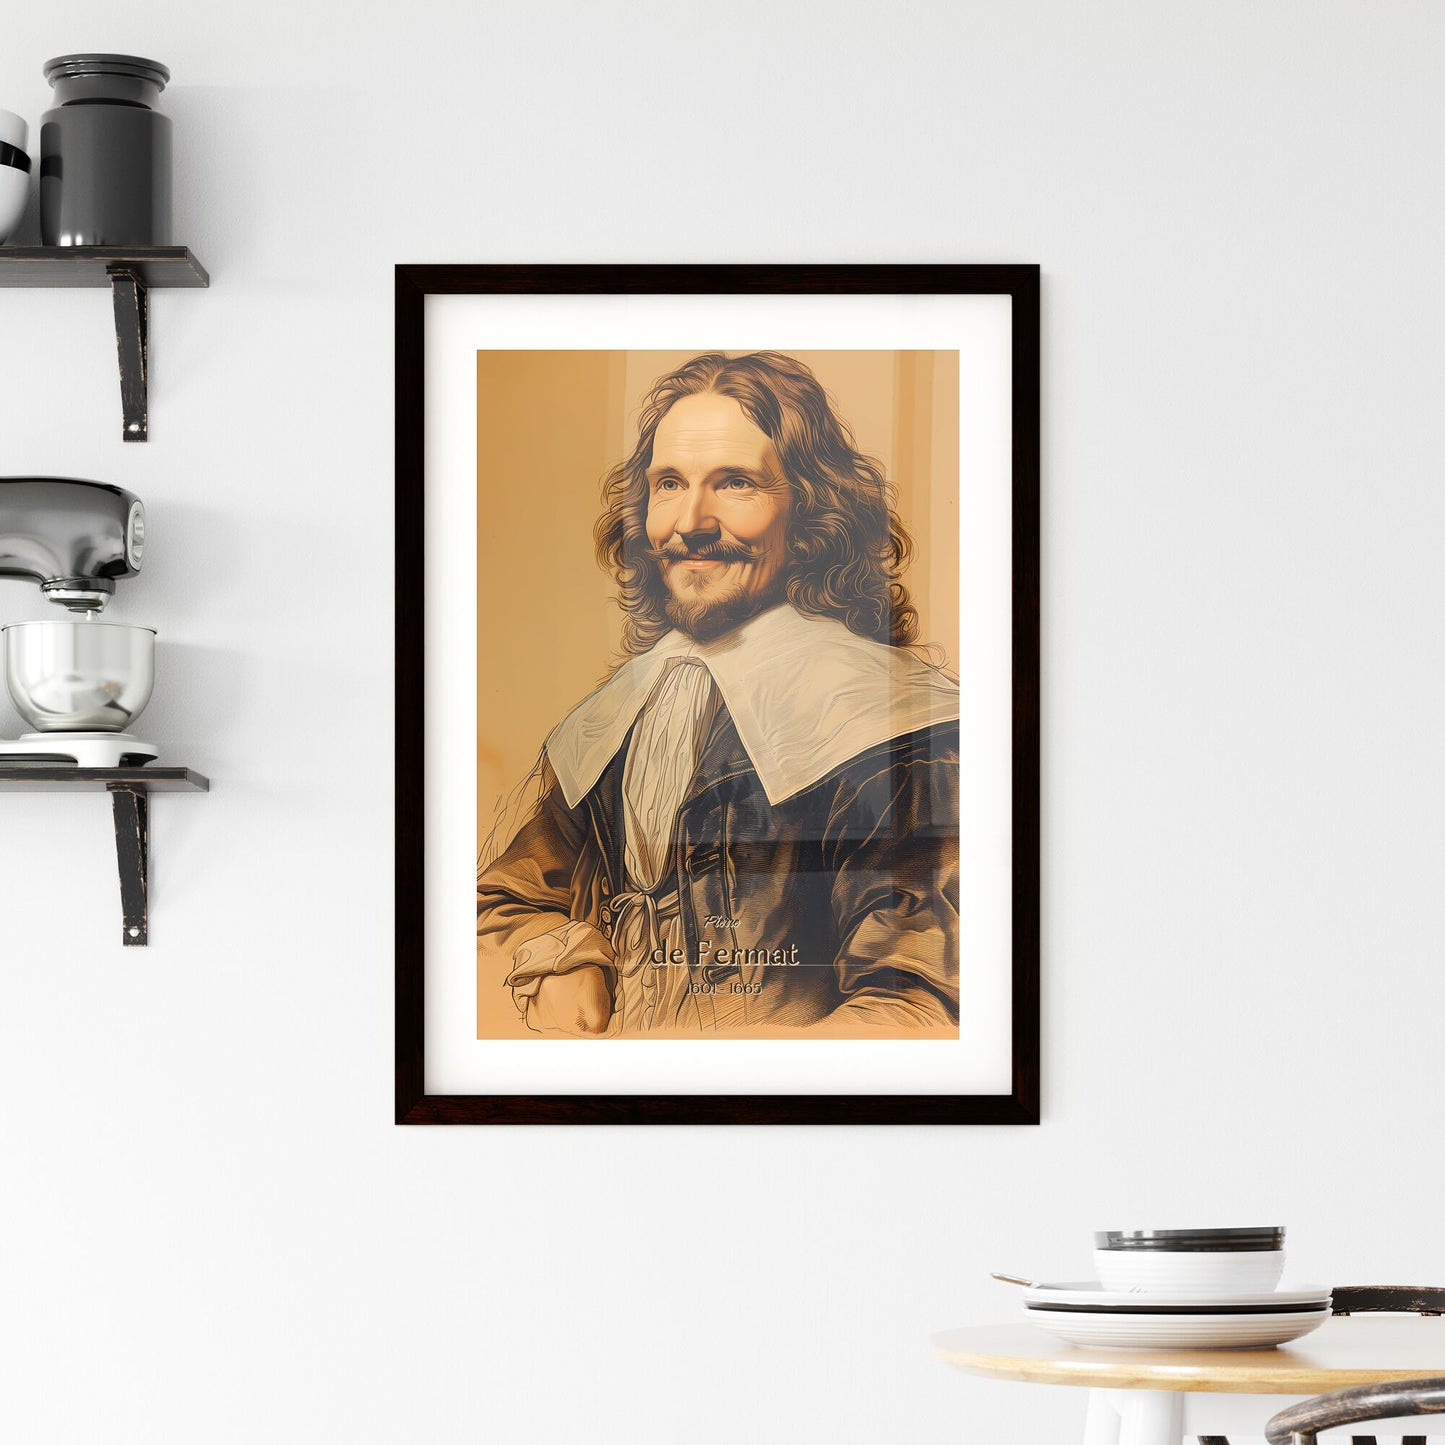 Pierre, de Fermat, 1601 - 1665, A Poster of a man with long hair and a beard Default Title